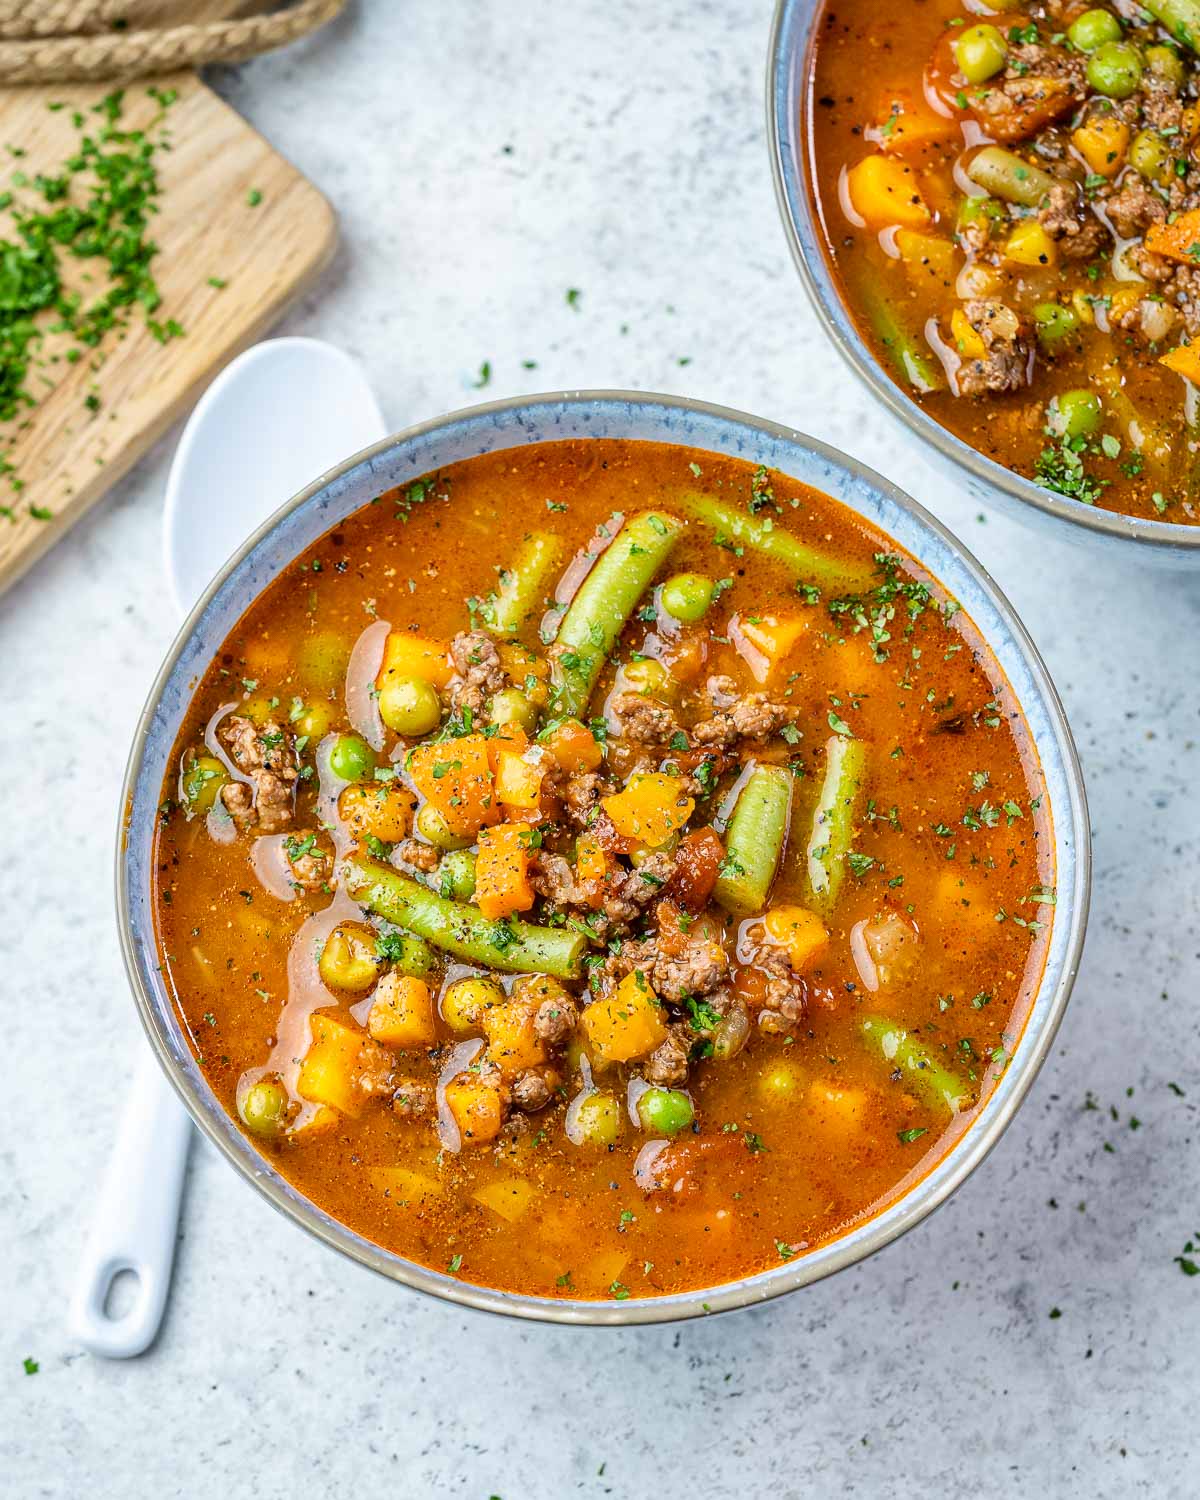 https://cleanfoodcrush.com/wp-content/uploads/2021/03/Instant-Pot-Beef-Vegetable-Soup-Clean-Eating-Recipe-Clean-Food-Crush.jpg